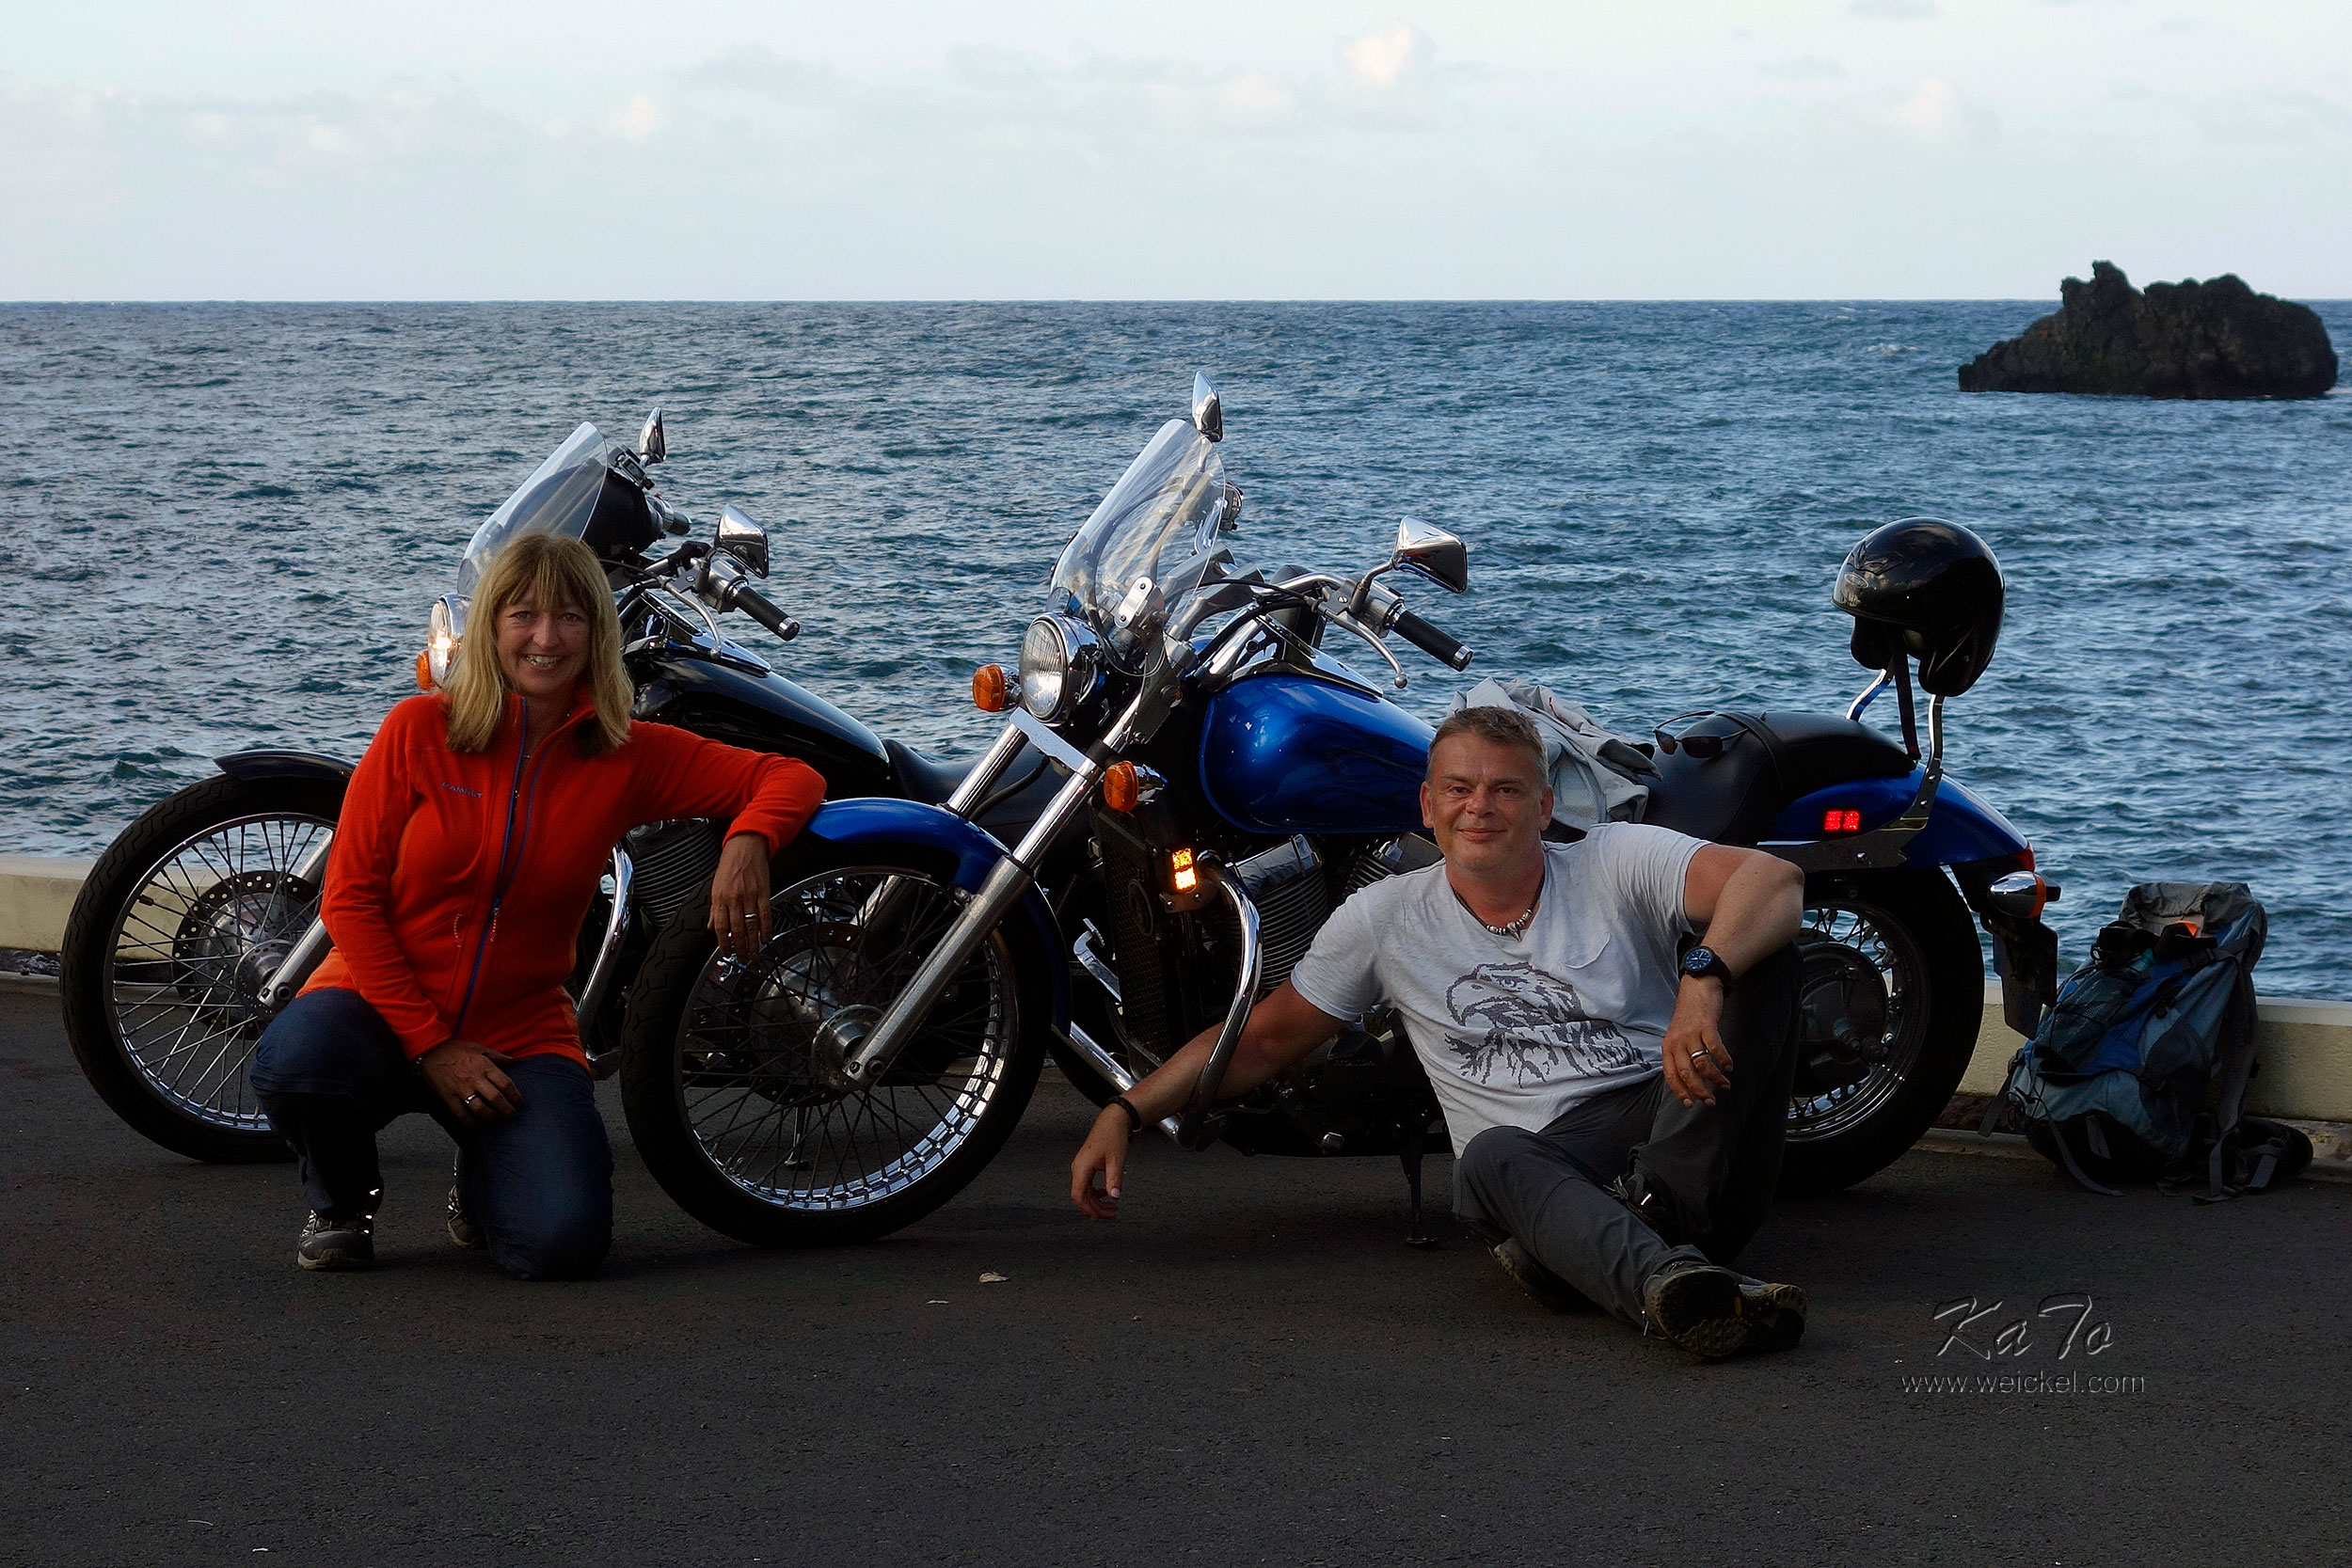 Great day with the bikes at Hana Highway